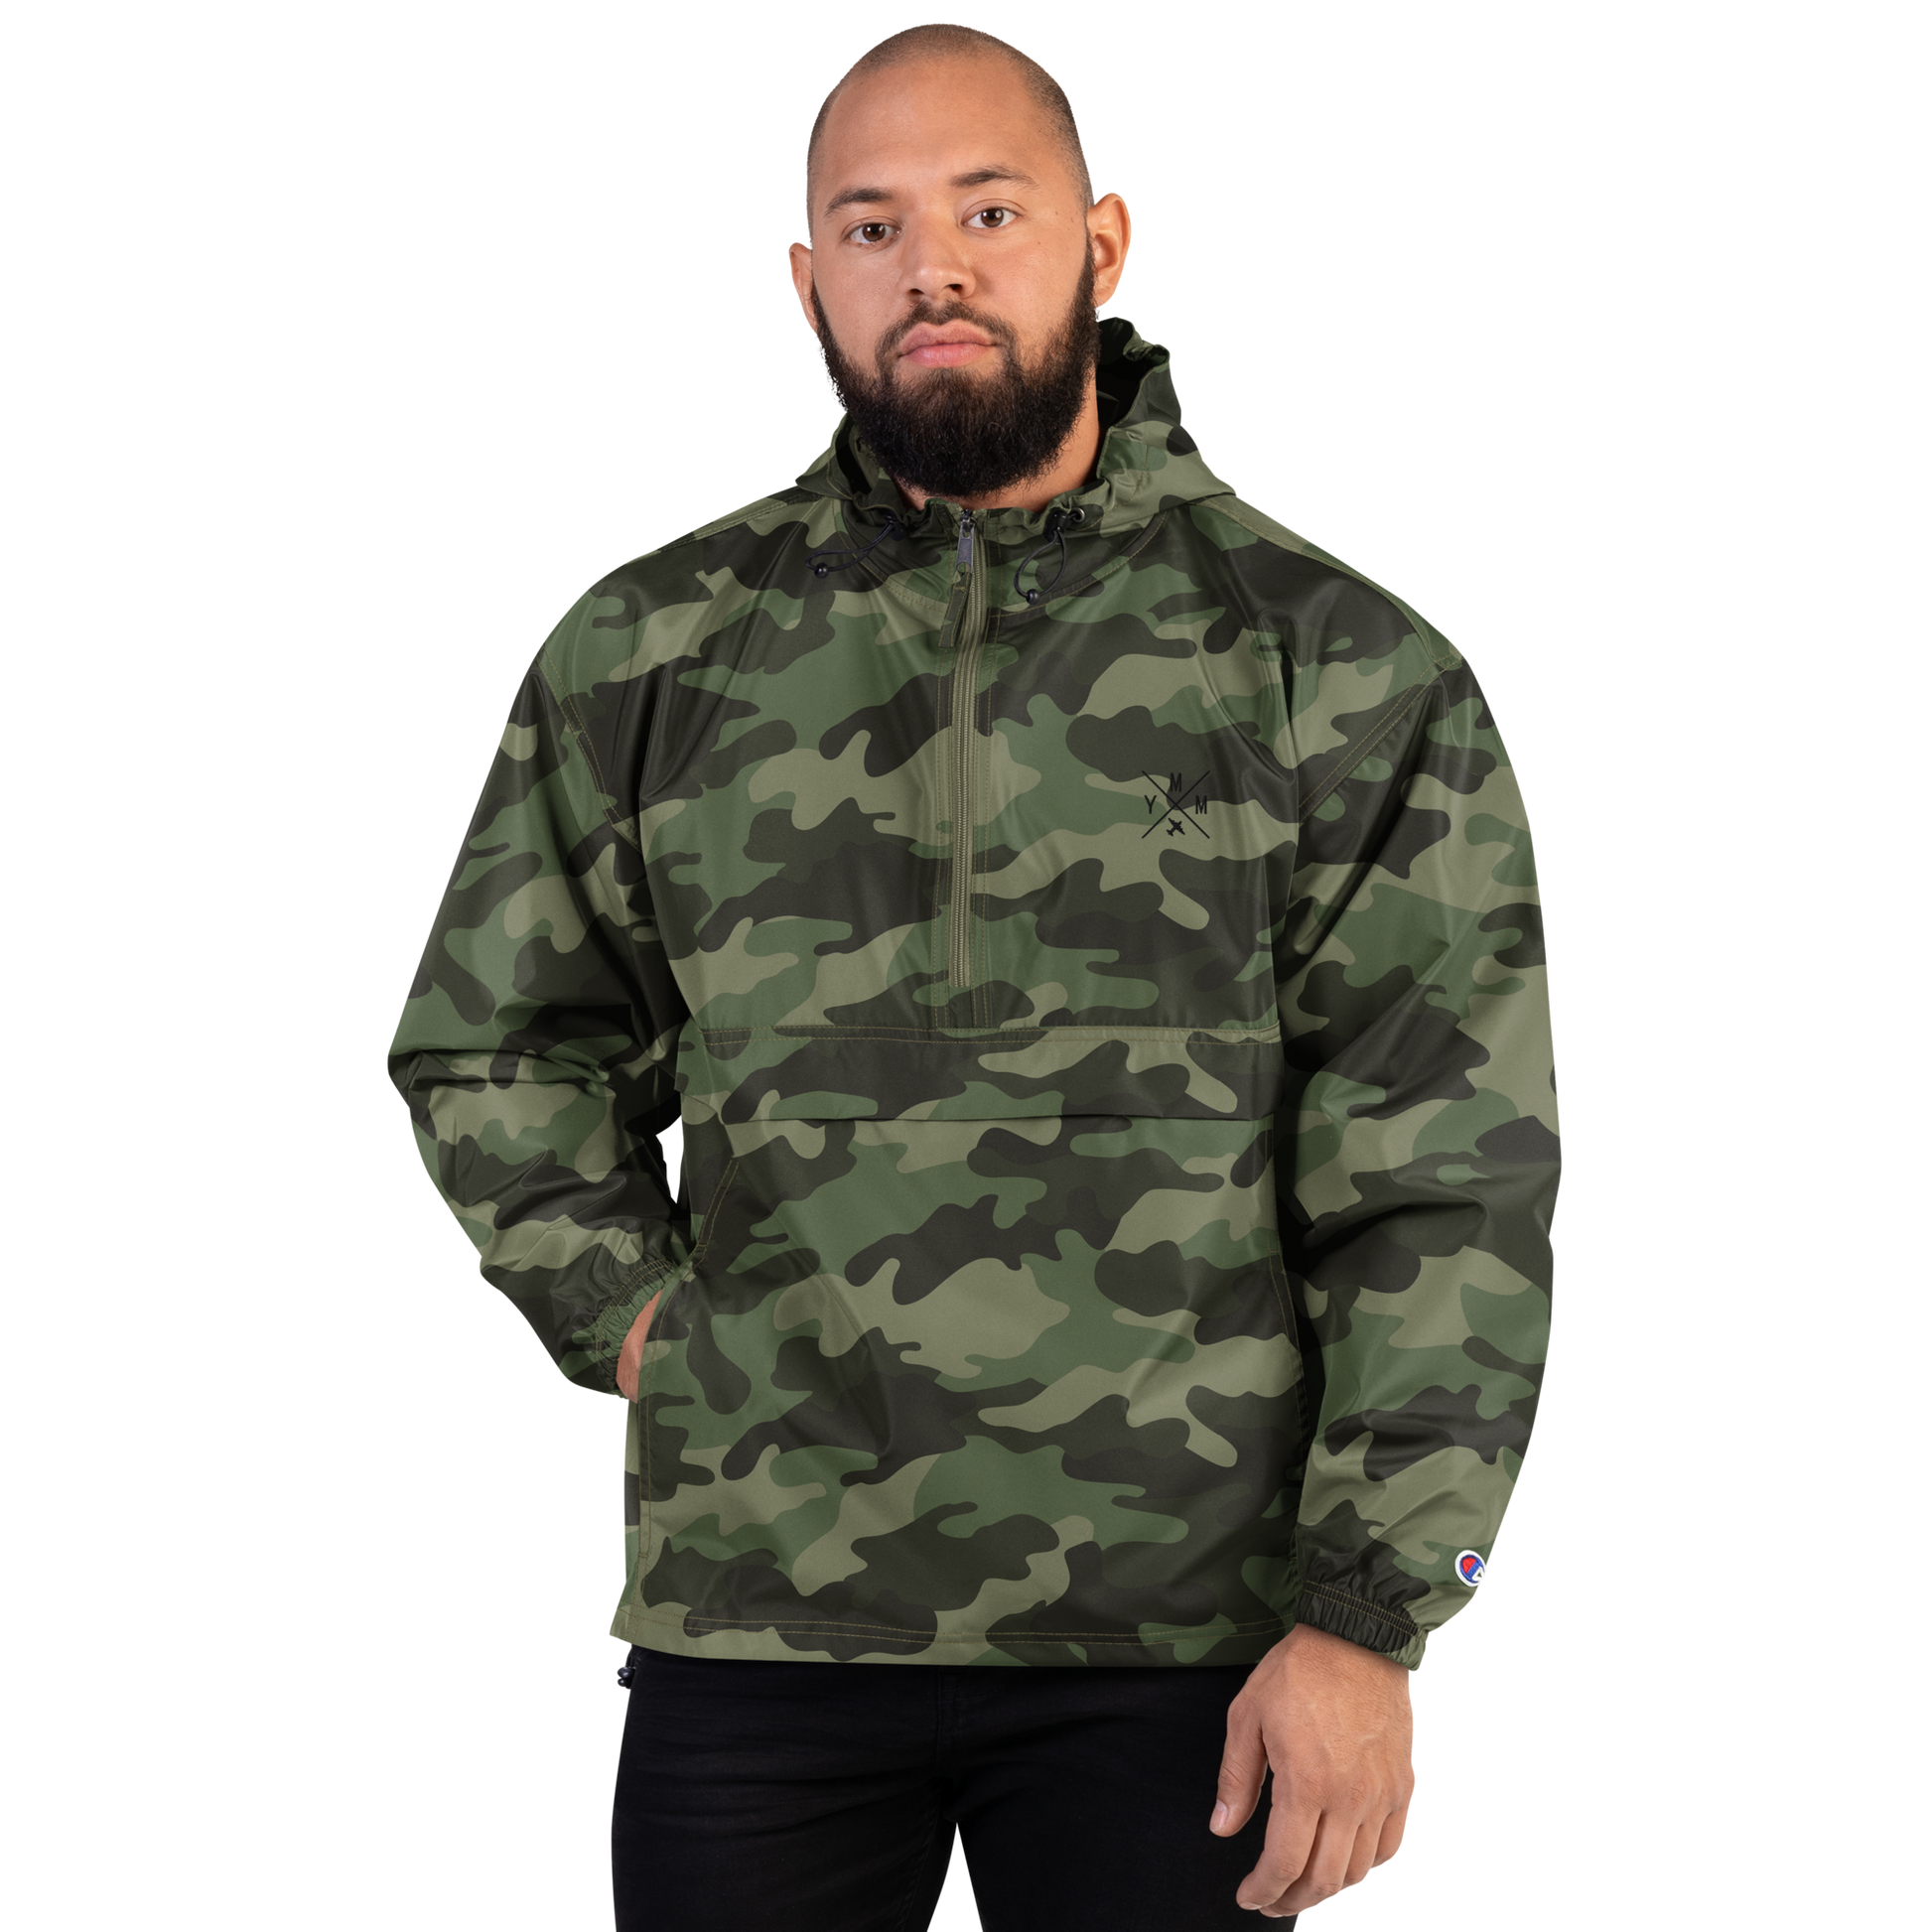 Crossed-X Packable Jacket • YMM Fort McMurray • YHM Designs - Image 13